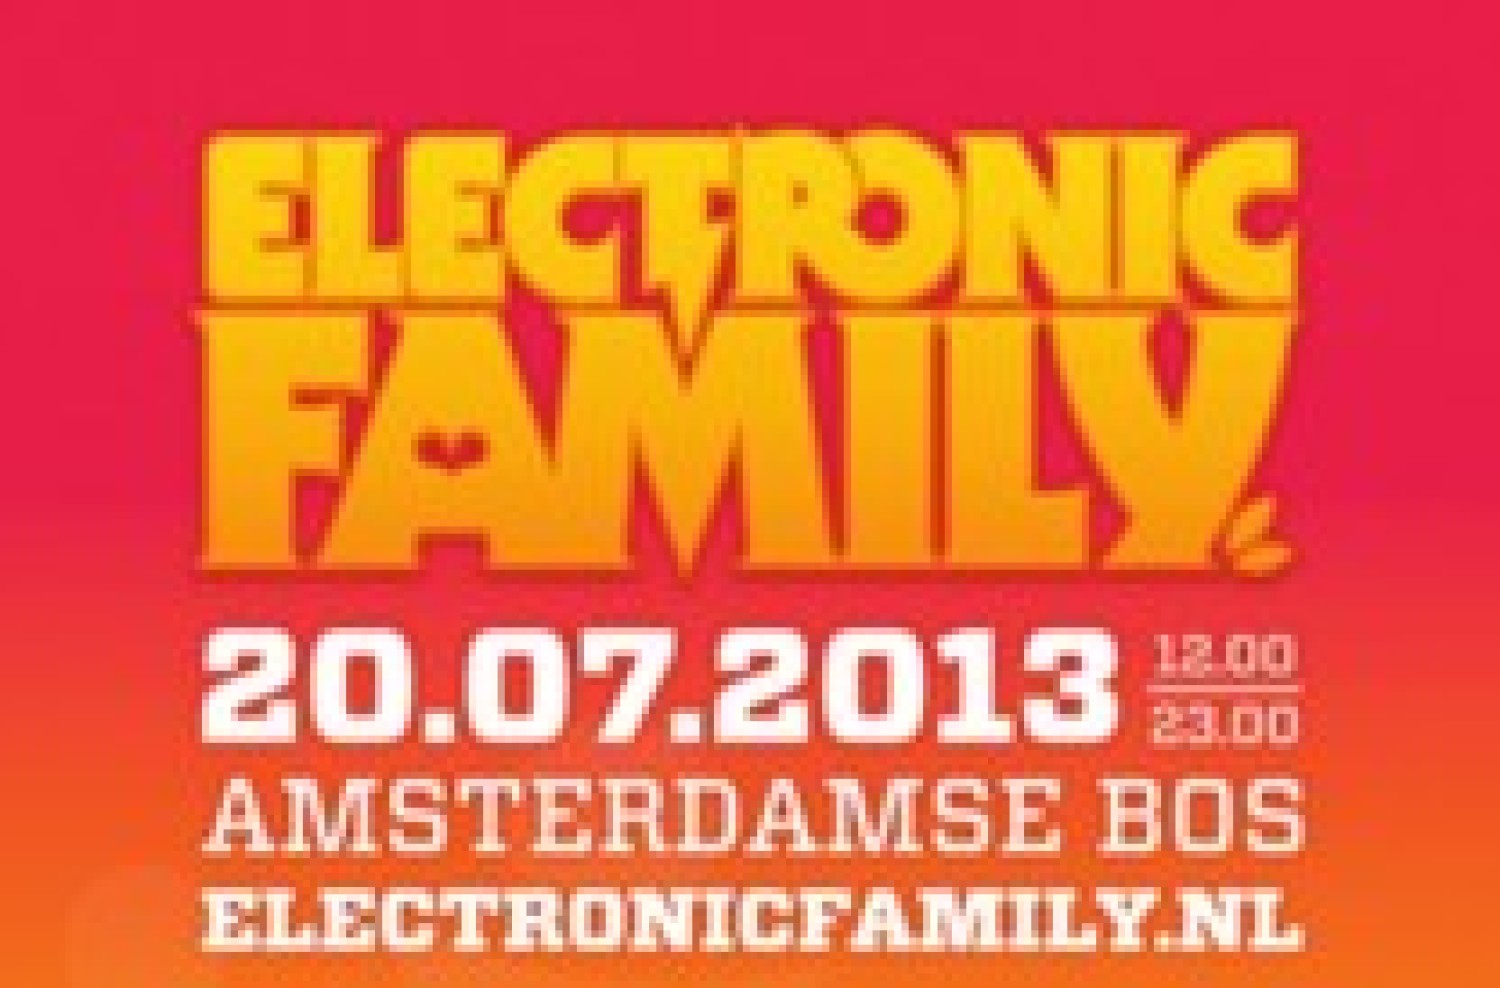 Party report: Electronic Family, Amsterdamse Bos, 20 juli 2013